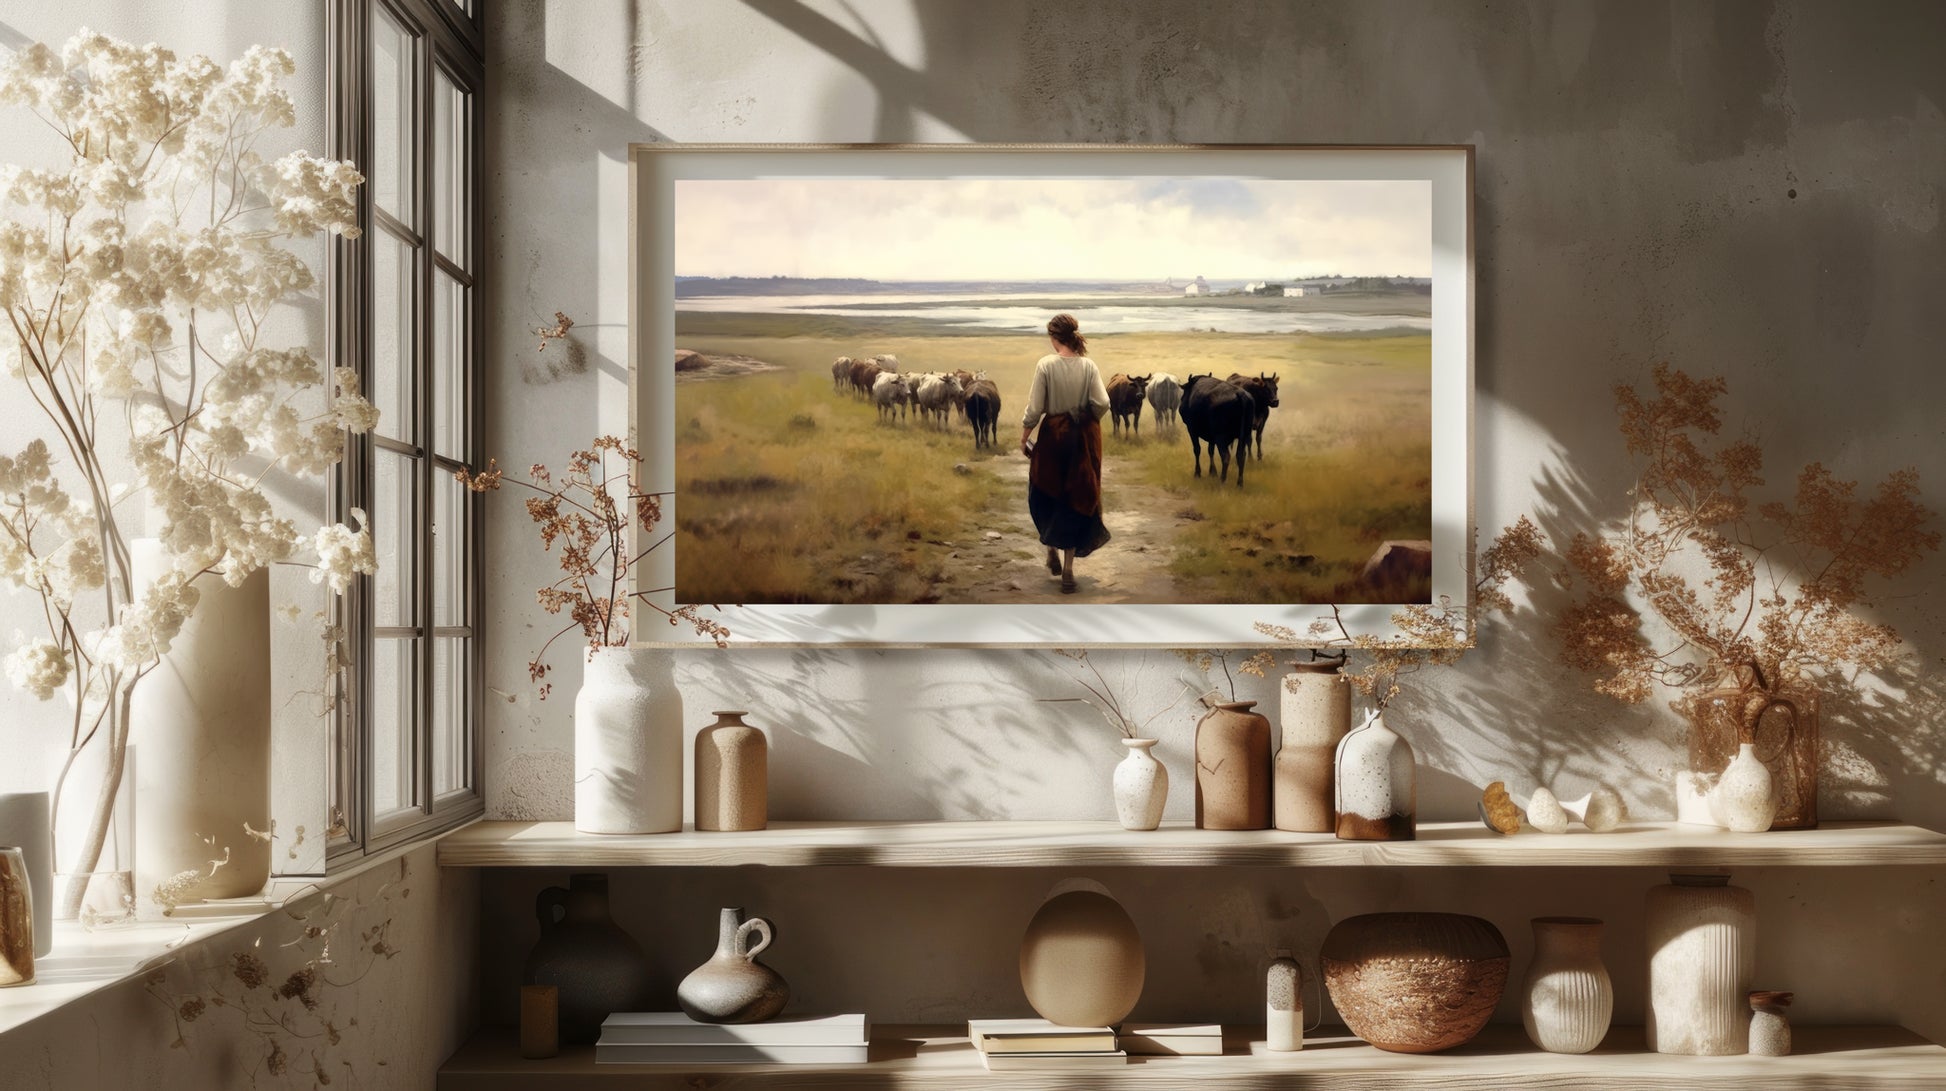 Artwork print showing a woman and her cattle in a serene Down East Maine field.